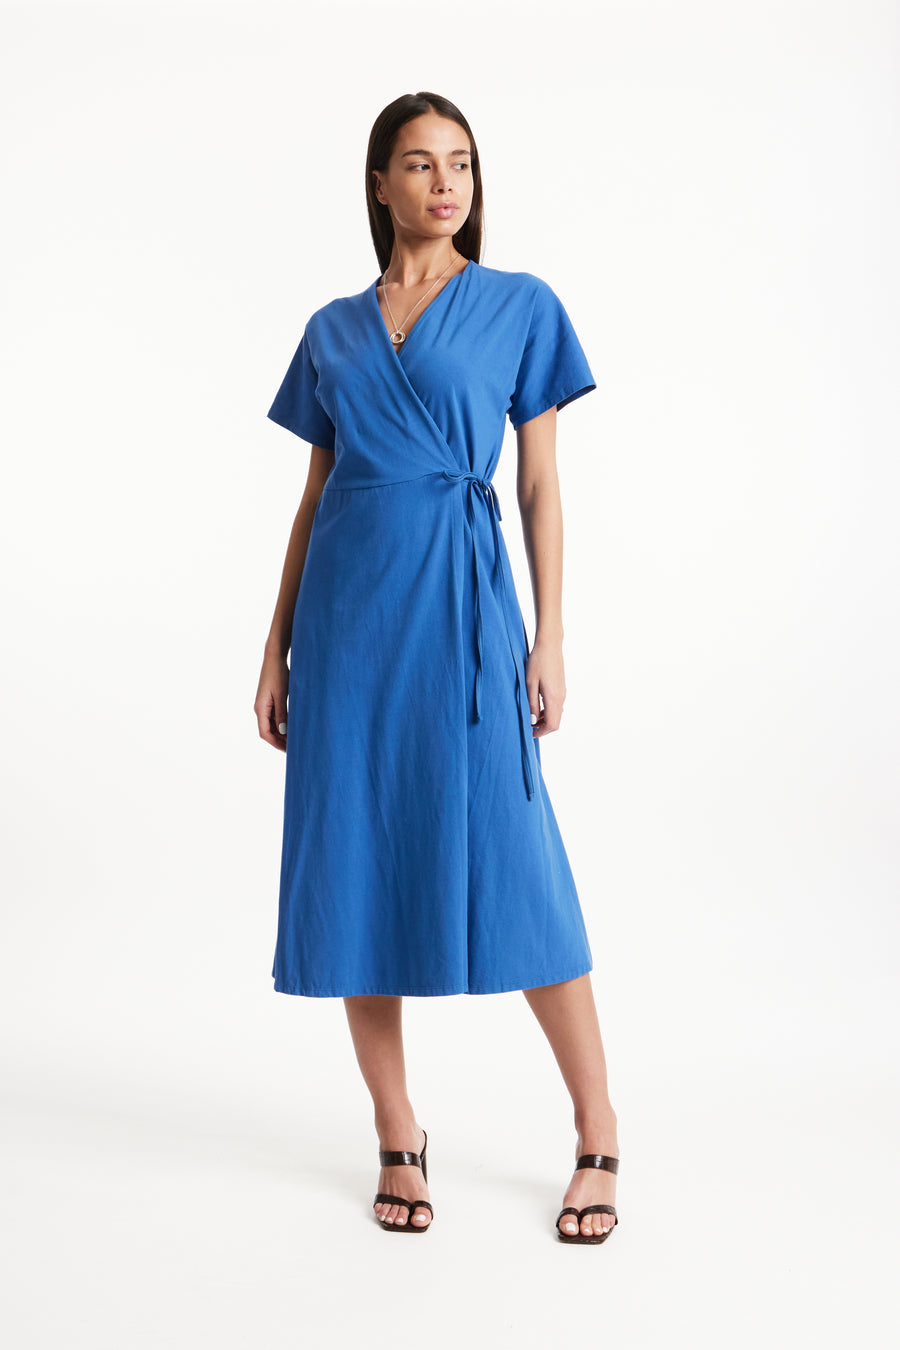 People Tree Fair Trade, Ethical & Sustainable Leora Wrap Dress in Blue 95% organic certified cotton, 5% elastane